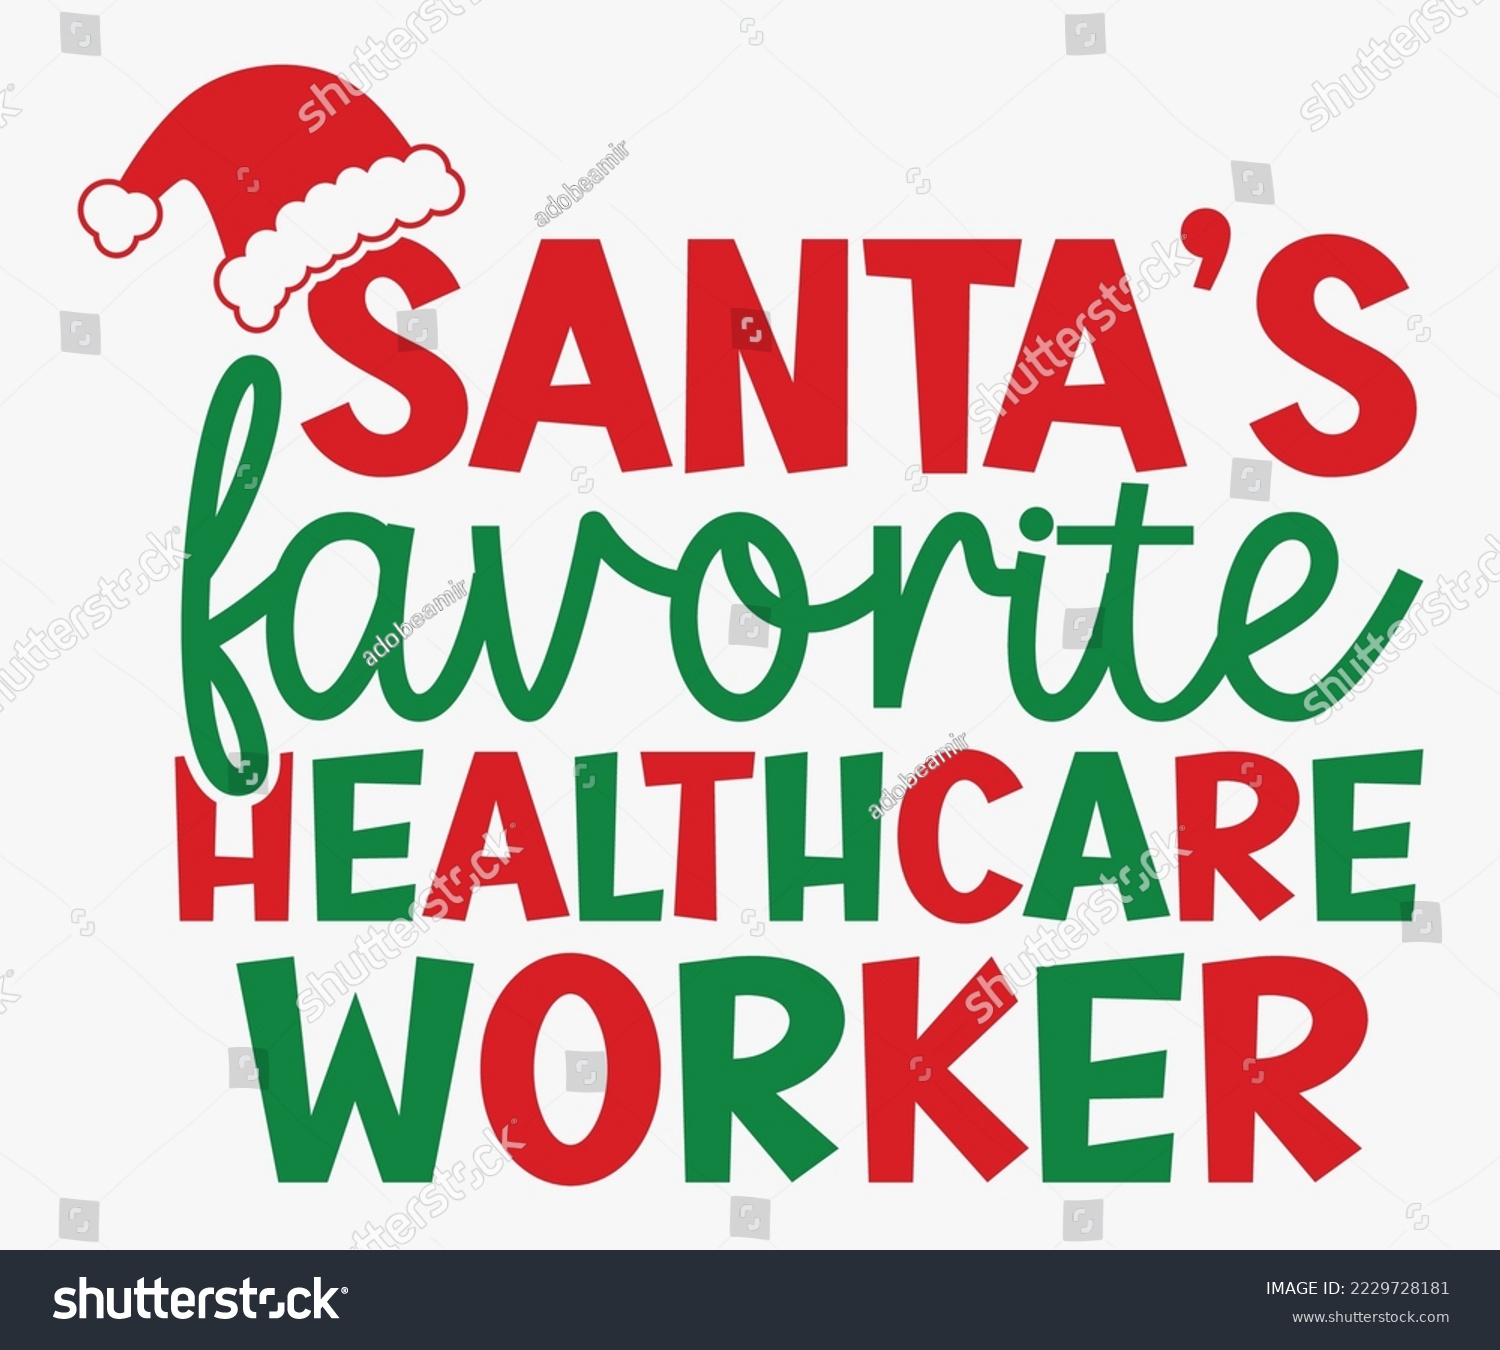 SVG of Santa's Favorite Urology Department, Office Manager, Hair Stylist, Social Worker, Medical Assistant, Mama, Dental Team, Physical Therapist, Counselor, Healthcare Worker svg